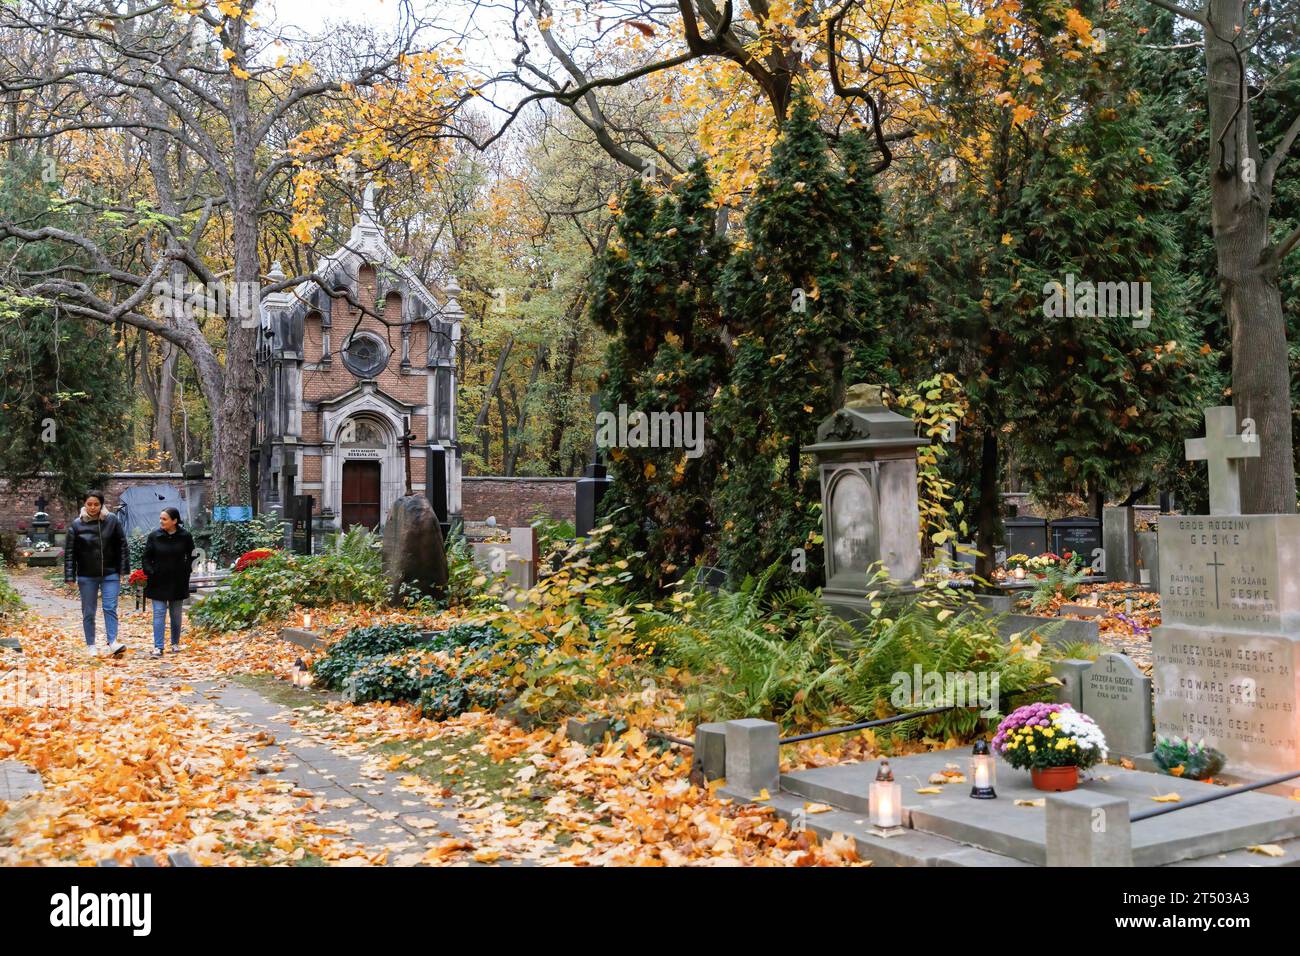 People take a walk through the cemetery on All Saints' Day at the Evangelical-Augsburg Cemetery in Warsaw. All Saints' Day (or Dzie? Zaduszny in Polish) is a public holiday in Poland. It is an opportunity to remember deceased relatives. On this day, people bring flowers, typically chrysanthemums, and candles to cemeteries. The entire cemetery is filled with lights in the darkness. The Evangelical-Augsburg Cemetery is a historic Lutheran Protestant cemetery located in the western part of Warsaw. Since its opening in 1792, more than 100,000 people have been buried there. (Photo by Volha Shukaila Stock Photo